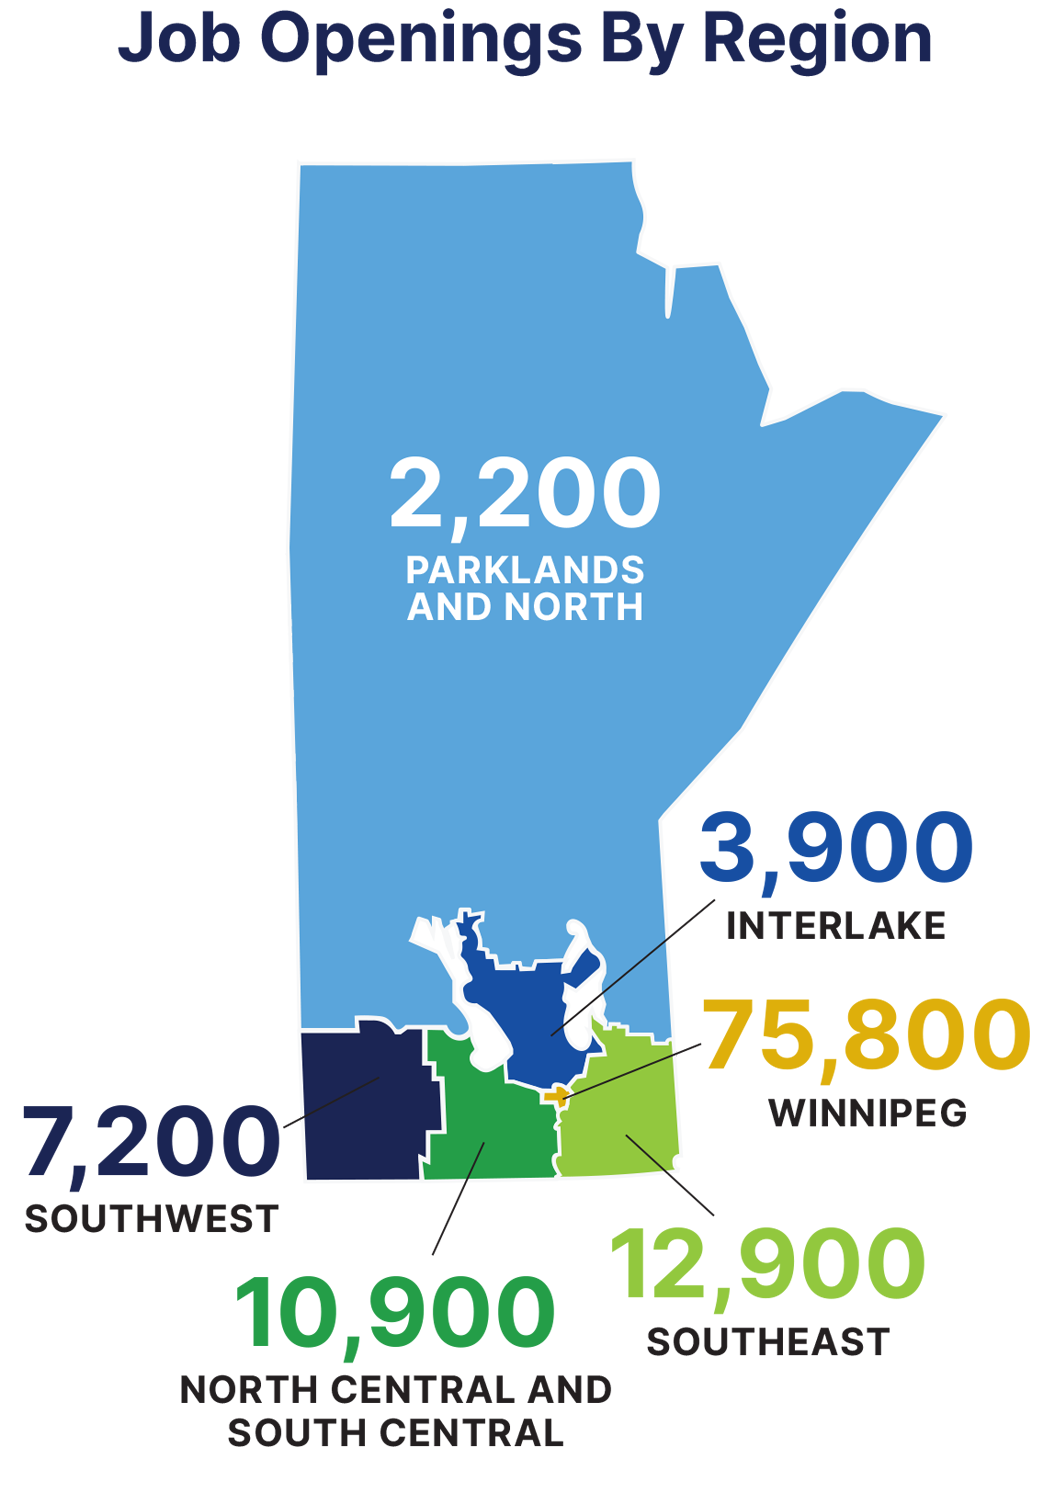 Image of job openings by Manitoba region: 2,200 in Parklands and North; 3,900 in Interlake; 75,800 in Winnipeg; 7,200 in Southwest; 10,900 in North Central and South Central; 12,900 in Southeast 